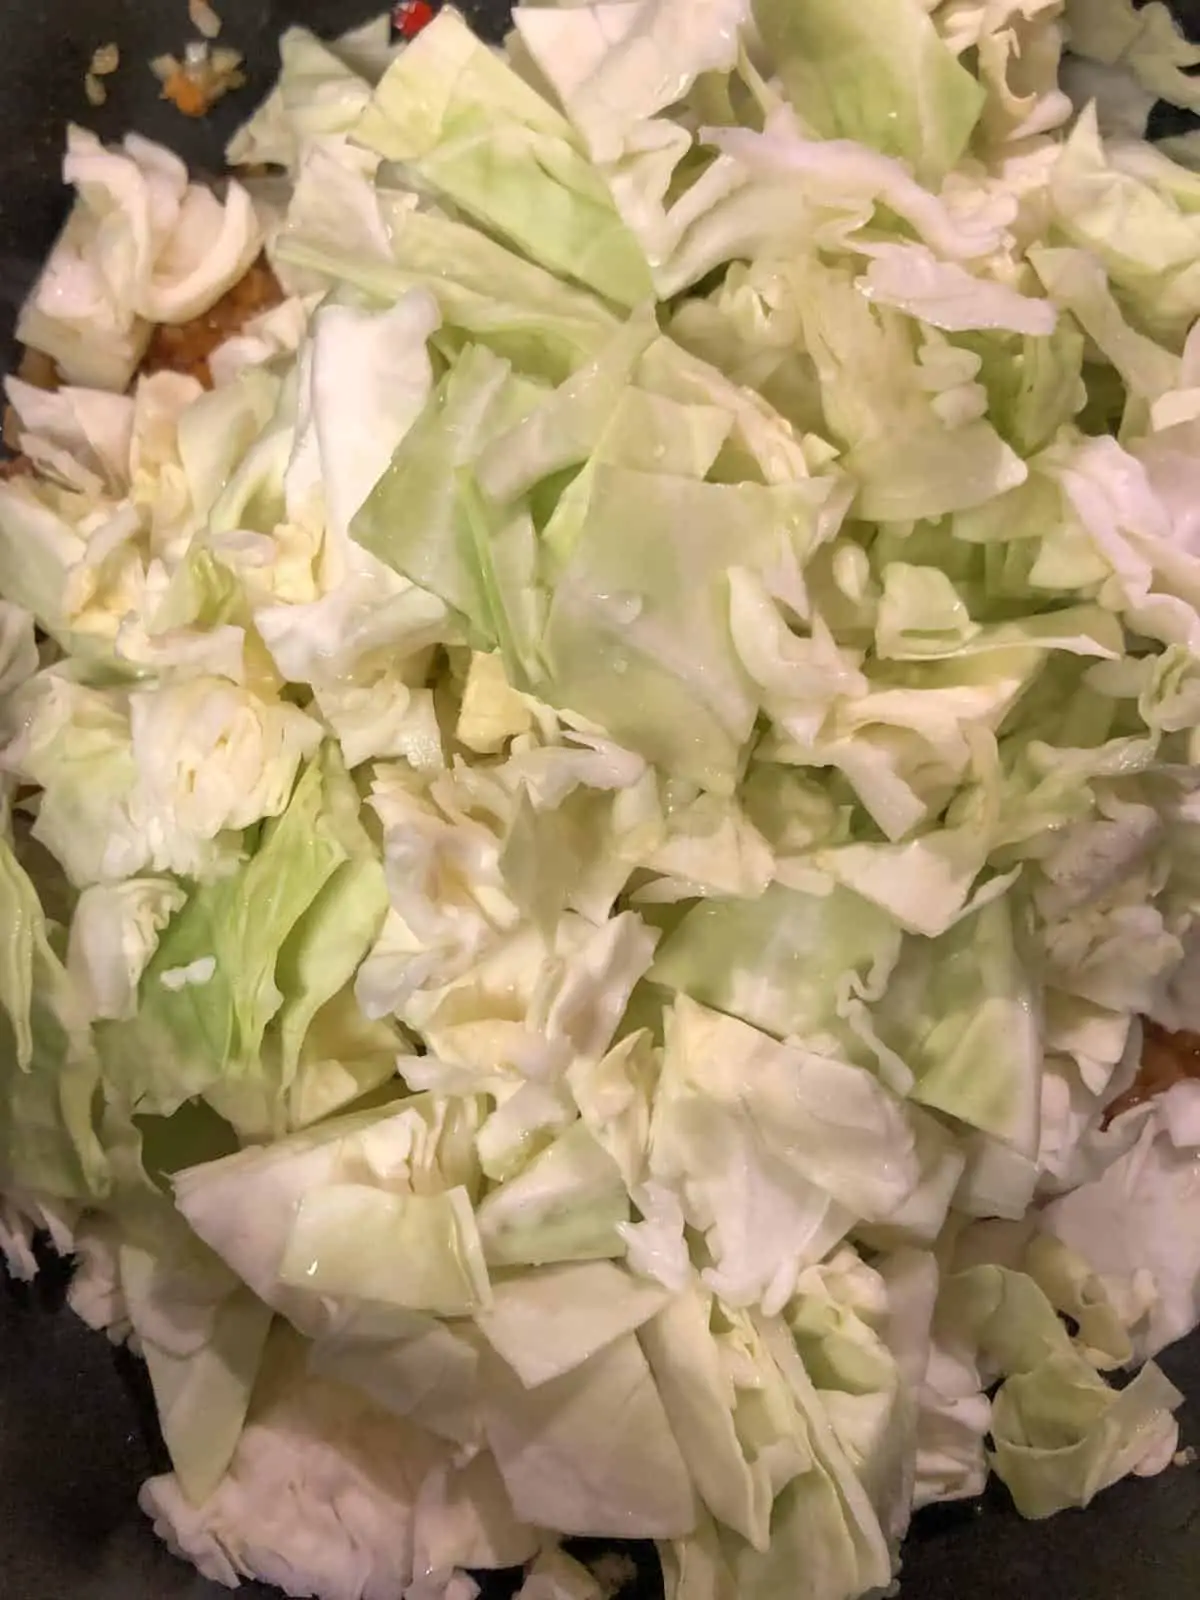 Chopped green cabbage.